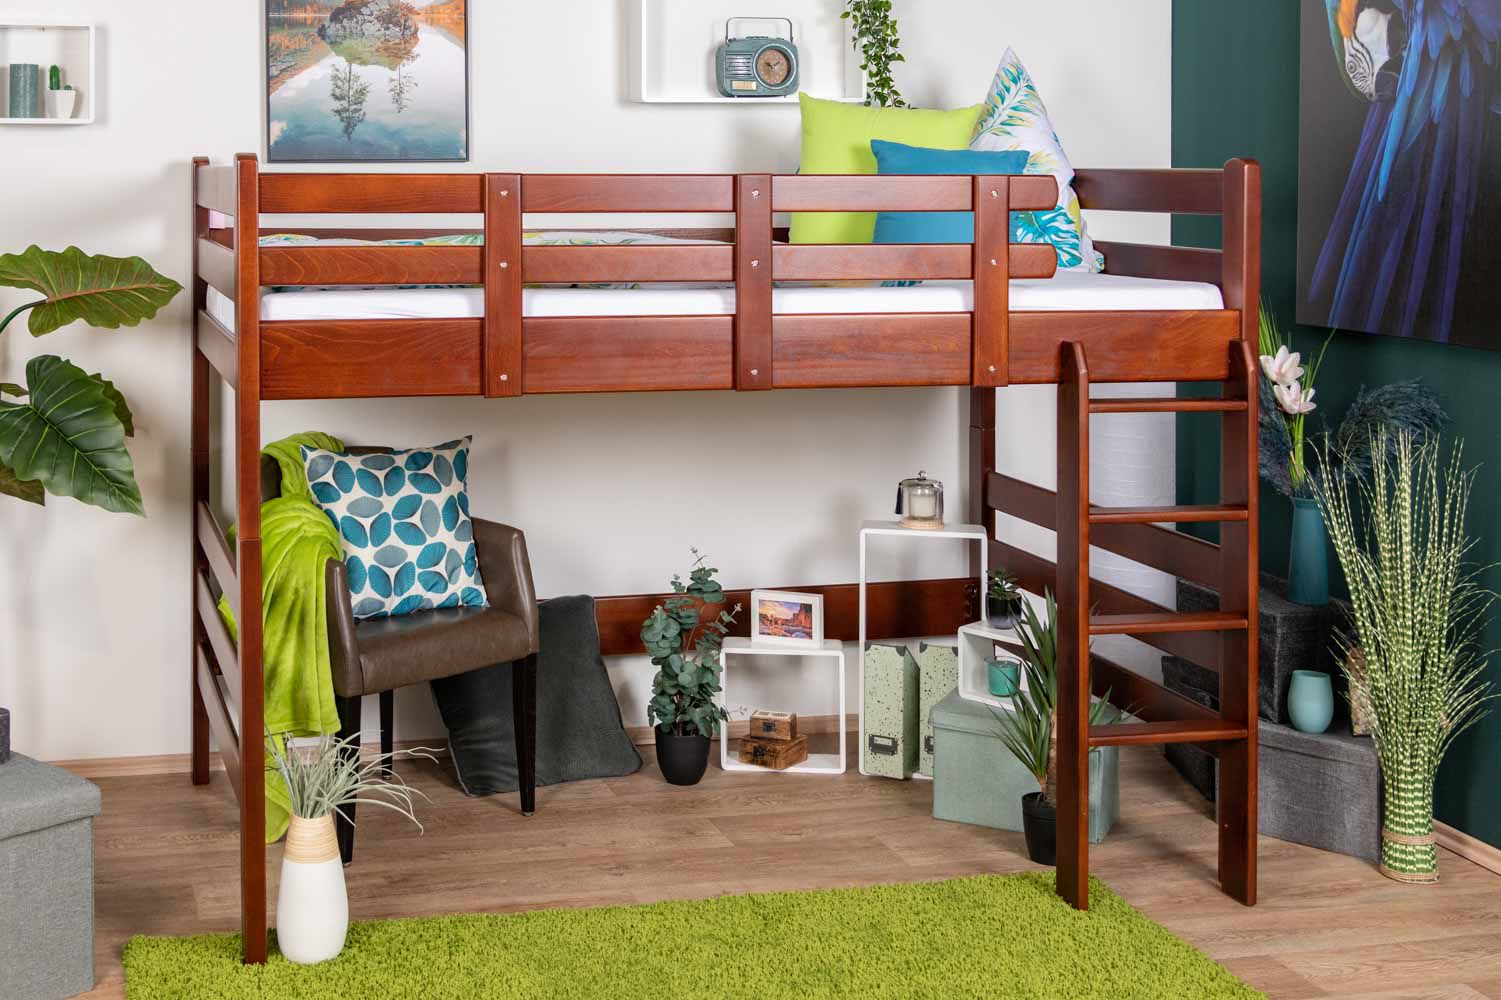 Loft bed 120 x 200 cm "Easy Premium Line" K23/n, solid beech wood, dark brown lacquered, convertible